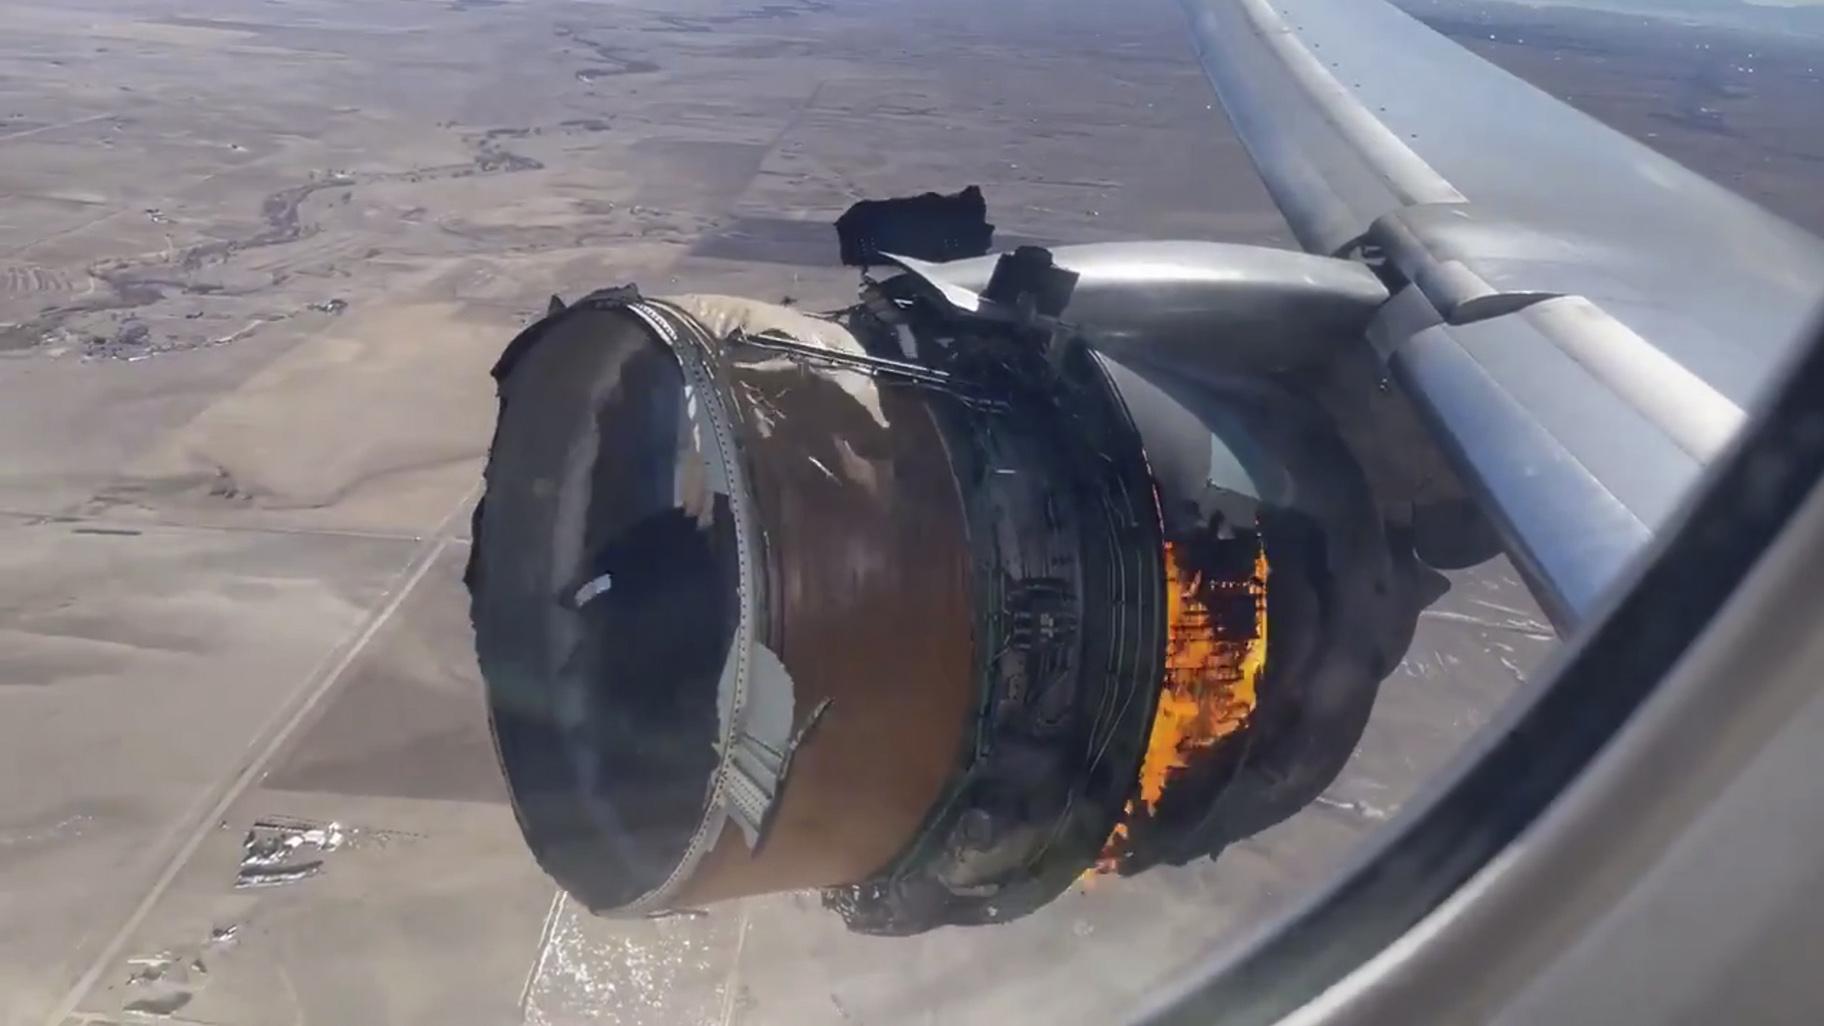 In this file photo taken from video, the engine of United Airlines Flight 328 is on fire after experiencing "a right-engine failure" shortly after takeoff from Denver International Airport, Saturday, Feb. 20, 2021, in Denver, Colo. Two passengers who were on board the United Airlines airplane that had to make an emergency landing are suing the company in separate suits filed Friday, April 16 in Chicago, where United is based. (Chad Schnell via AP, File)